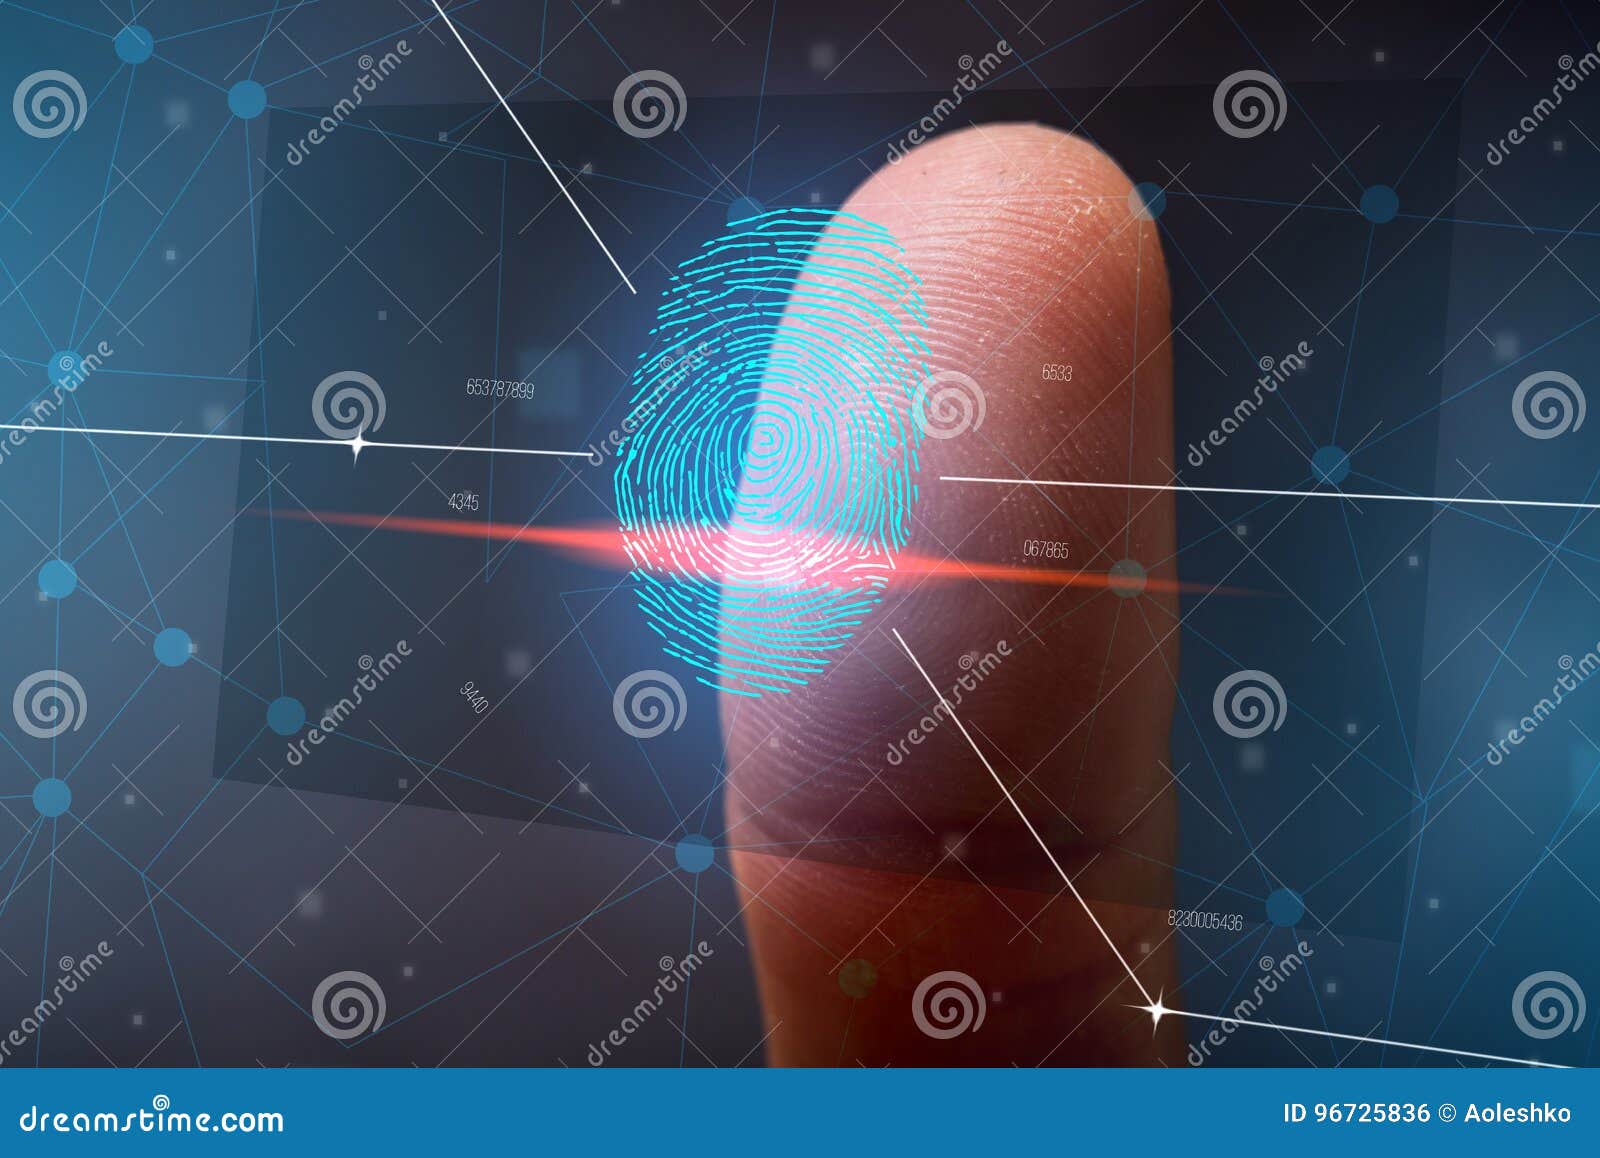 the scanning of the fingerprint. high technologies of information protection and biometric identification.